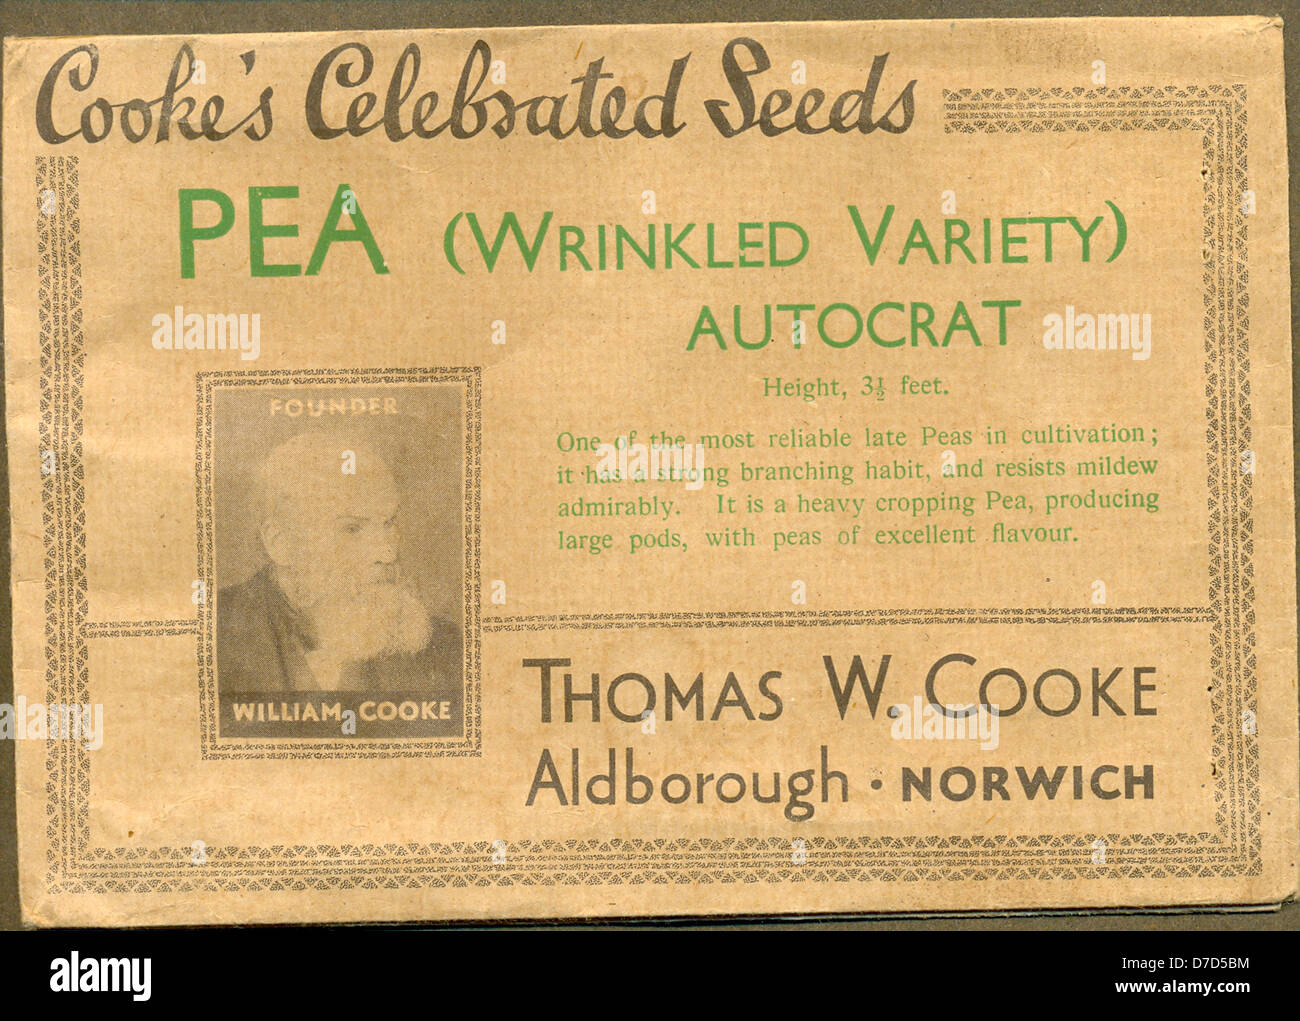 World War Two packet of  Pea seeds (Wrinkled Variety) Autocrat from Cooke's Celebrated Seeds Stock Photo